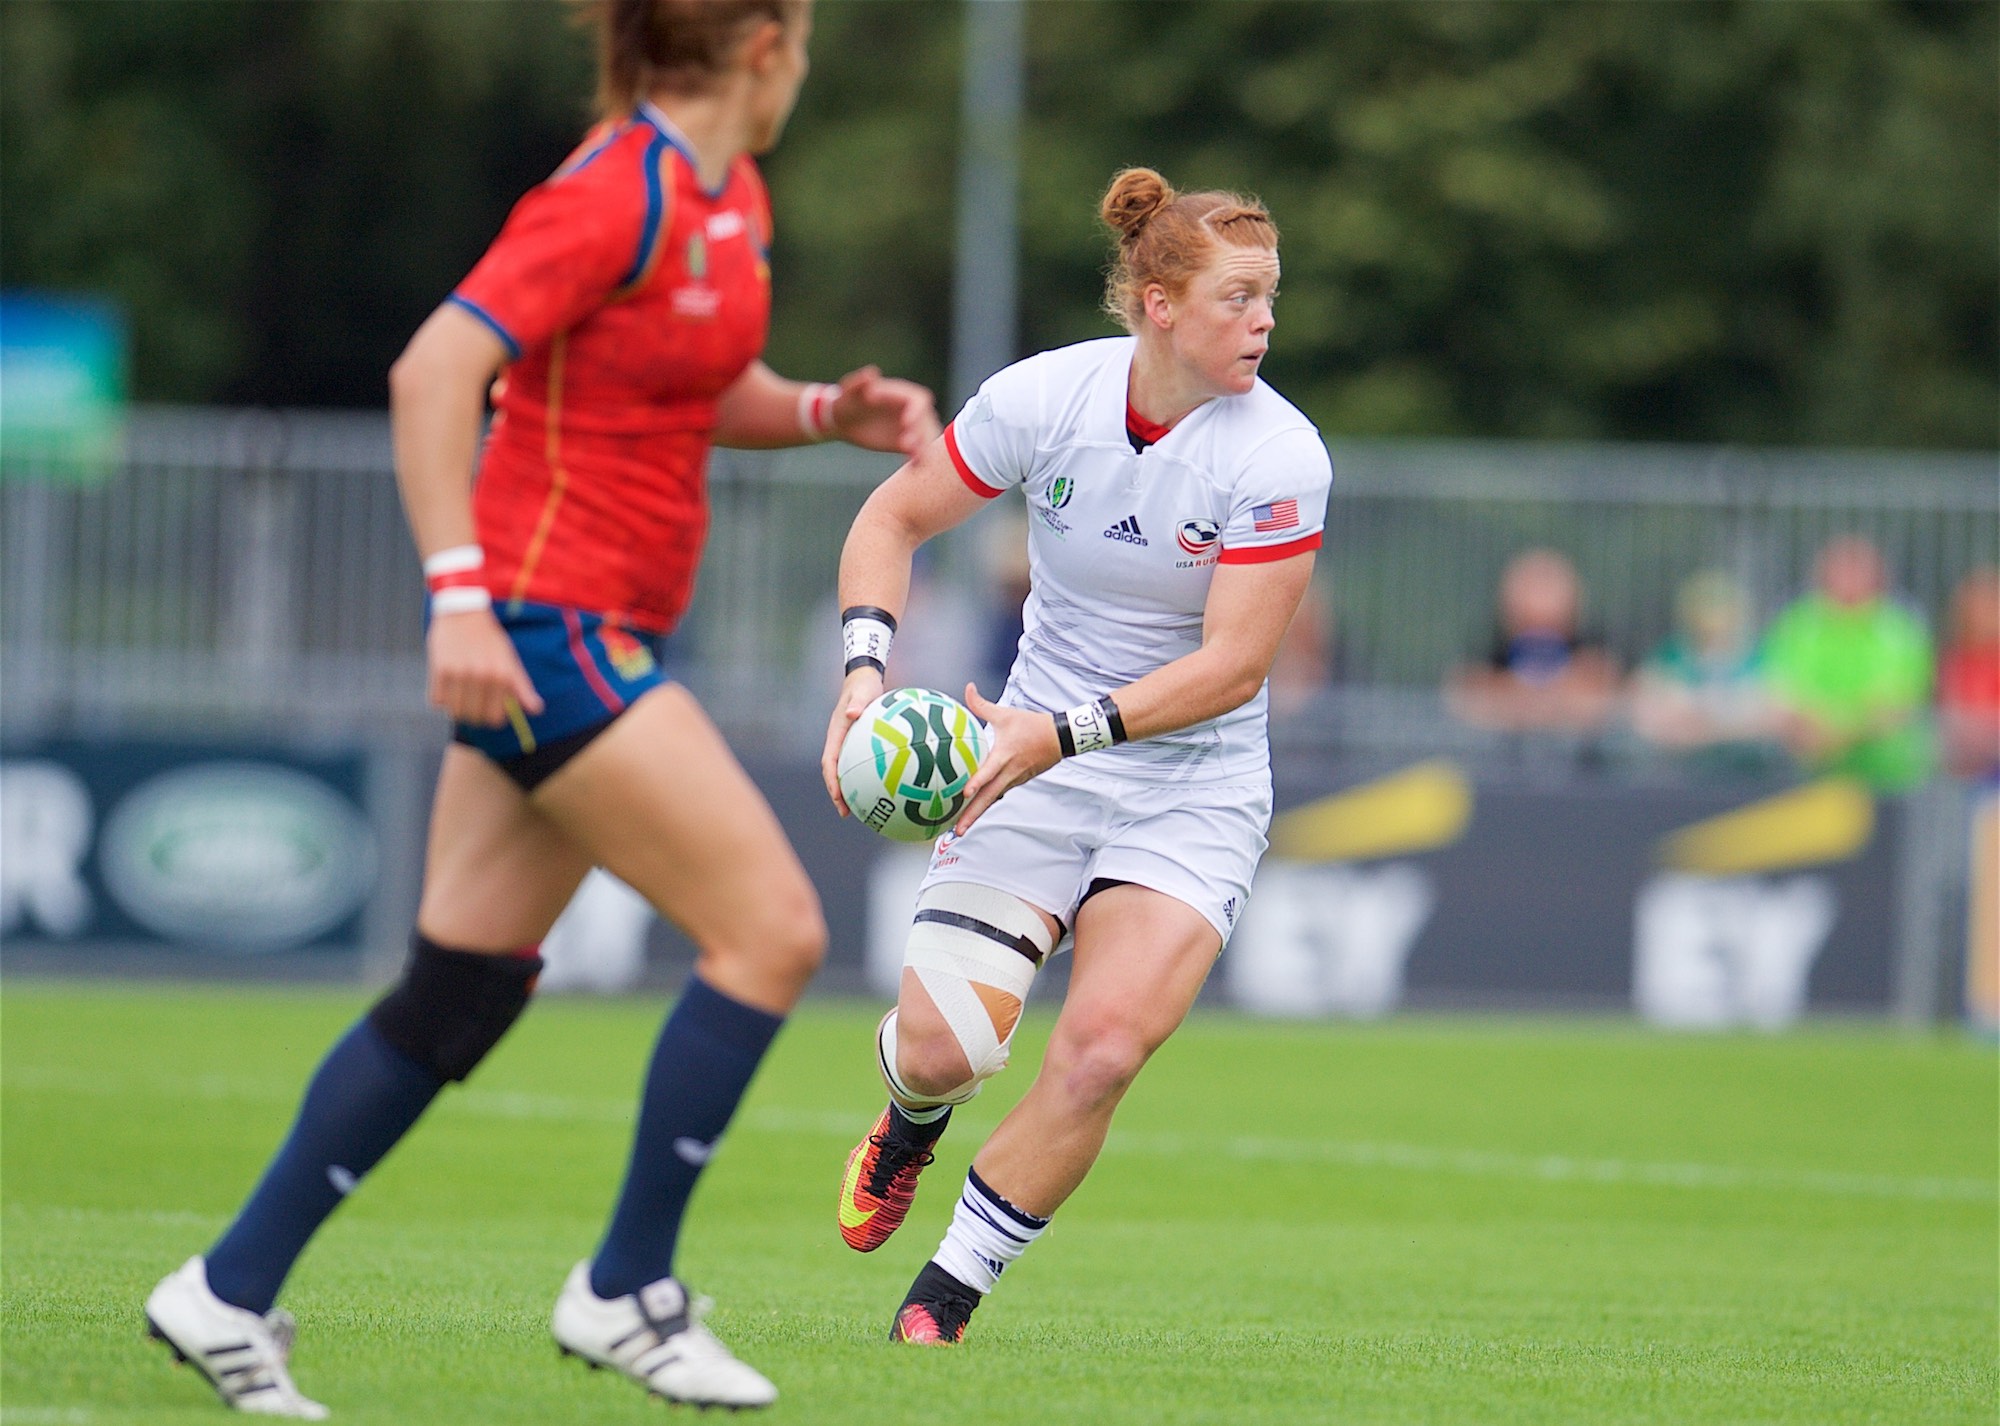 Alev Kelter in action for the USA against Spain in the 2017 Women's Rugby World Cup. Ian Muir photo for FloRugby.